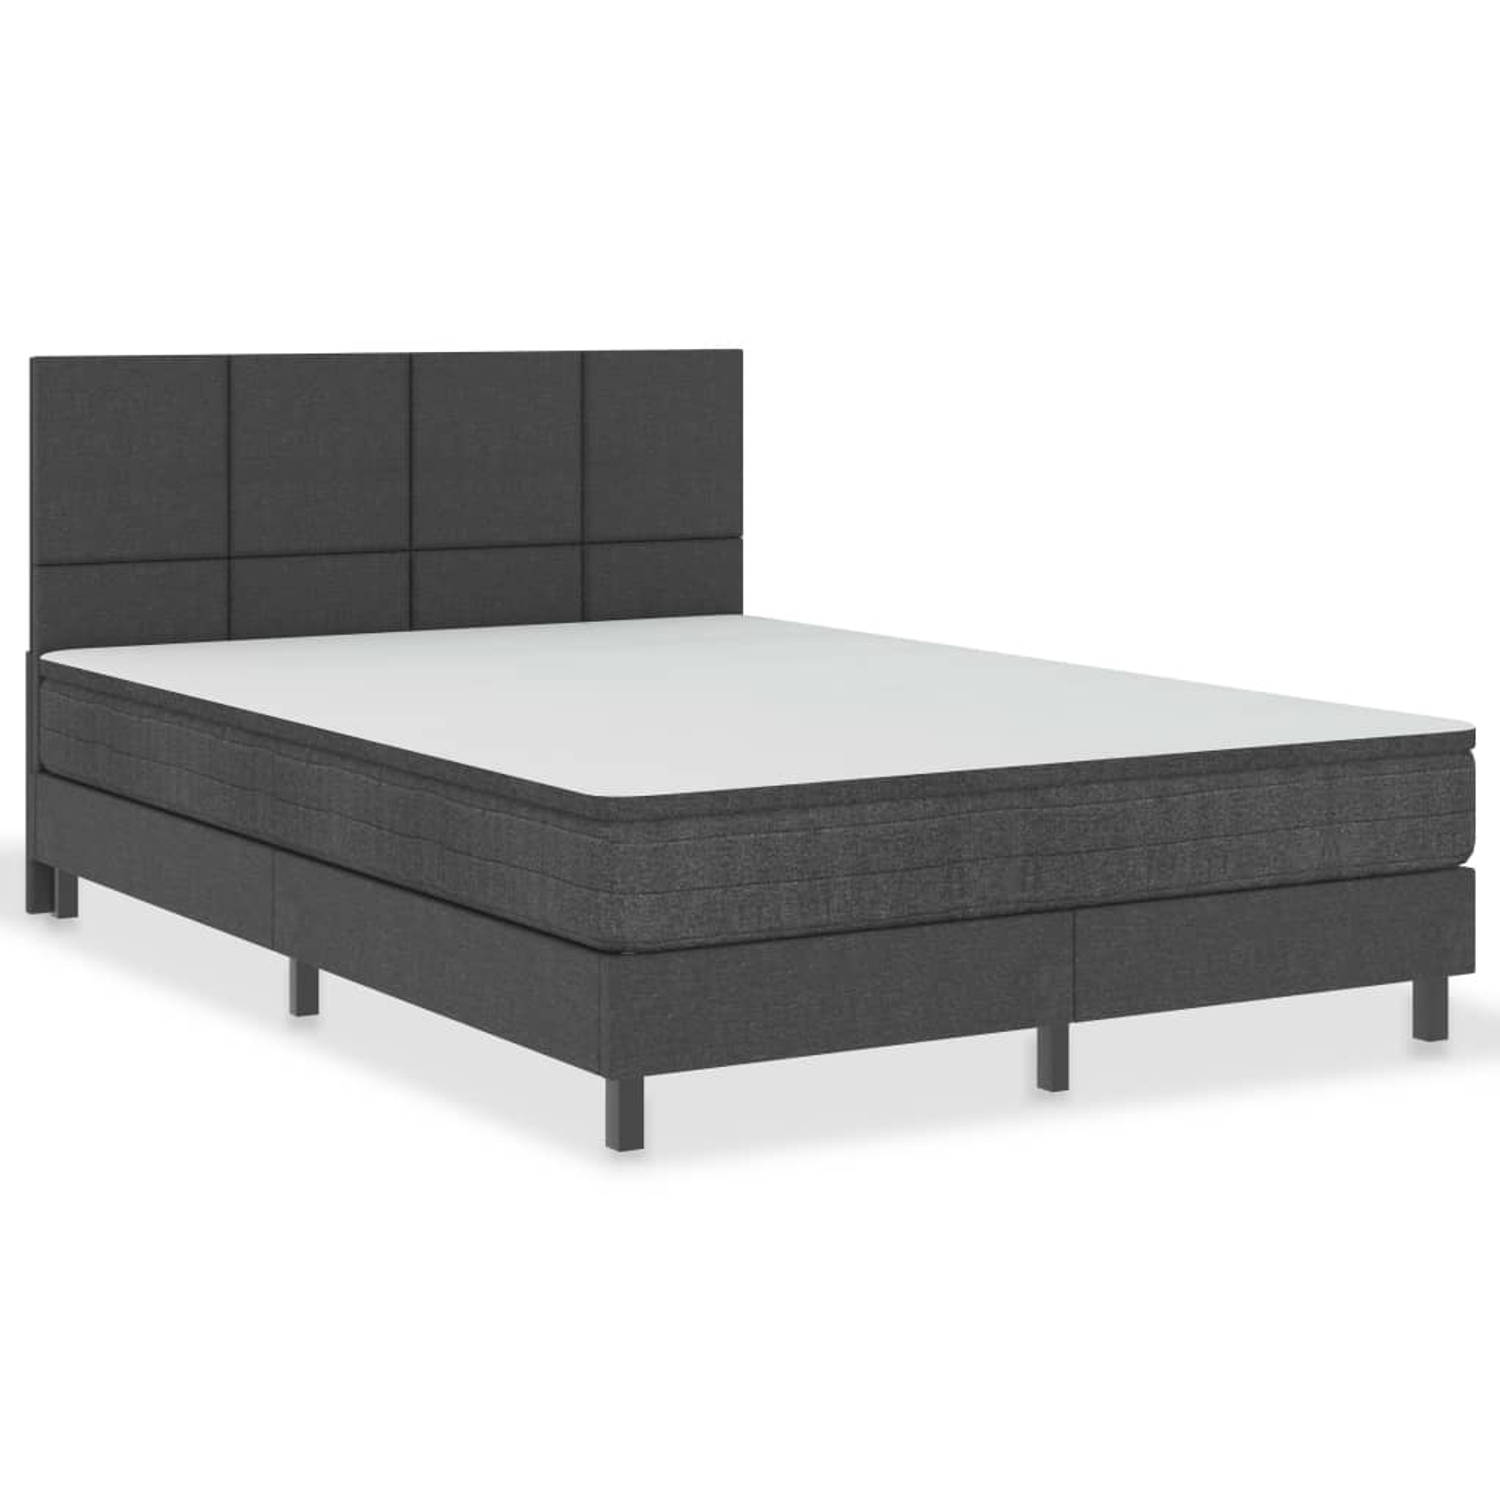 The Living Store Boxspring stof donkergrijs 180x200 cm - Boxspring - Boxsprings - Boxspringbed - Boxspringbedden - Hotelbed - Hotelbedden - Bed - Bedden - Tweepersoonsbed - Tweeper